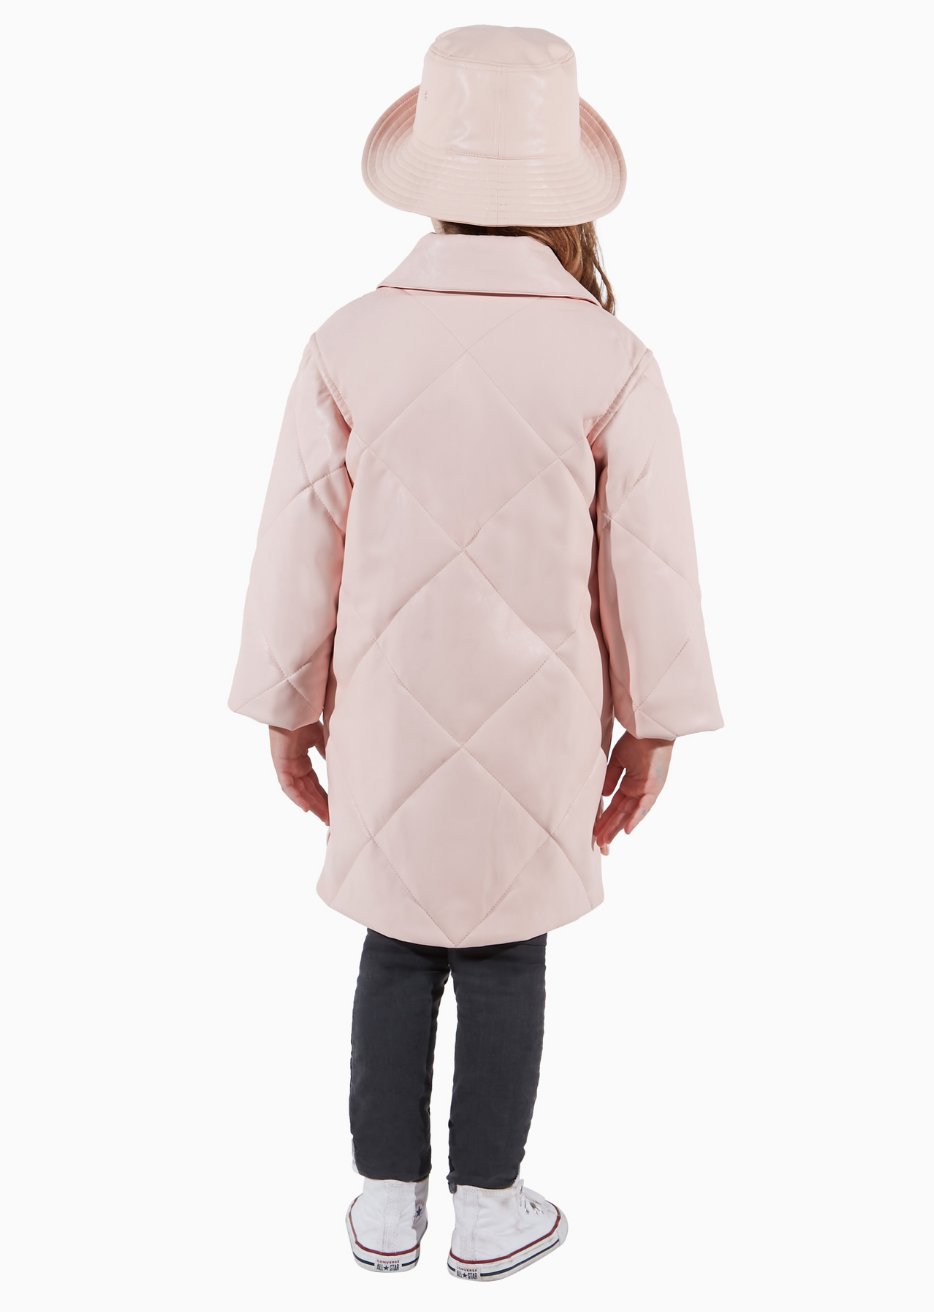 Charlie Rose Pink Sustainable Vegan Children Outerwear Quilted Fashion Shacket